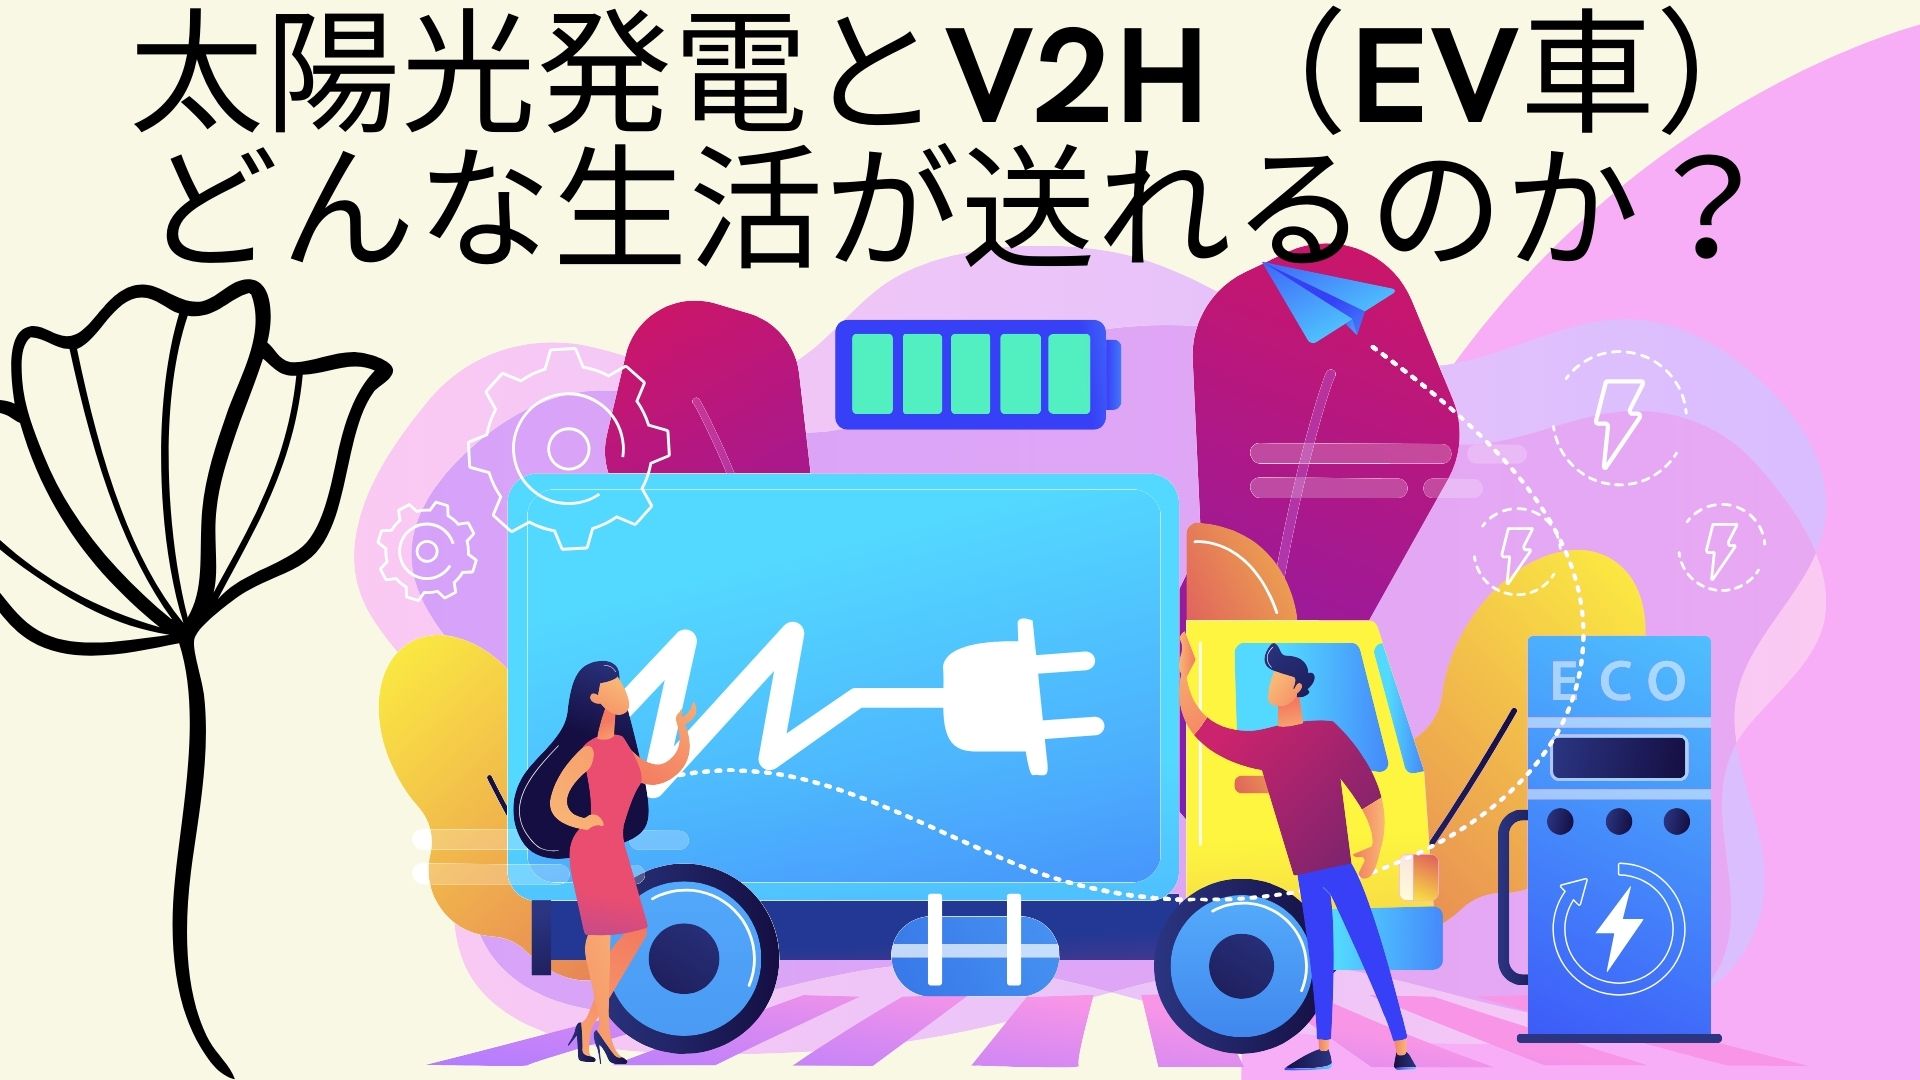 life-with-photovoltaic-power-generation-and-V2H-and-electric-car-in-kansai-electric-power-area